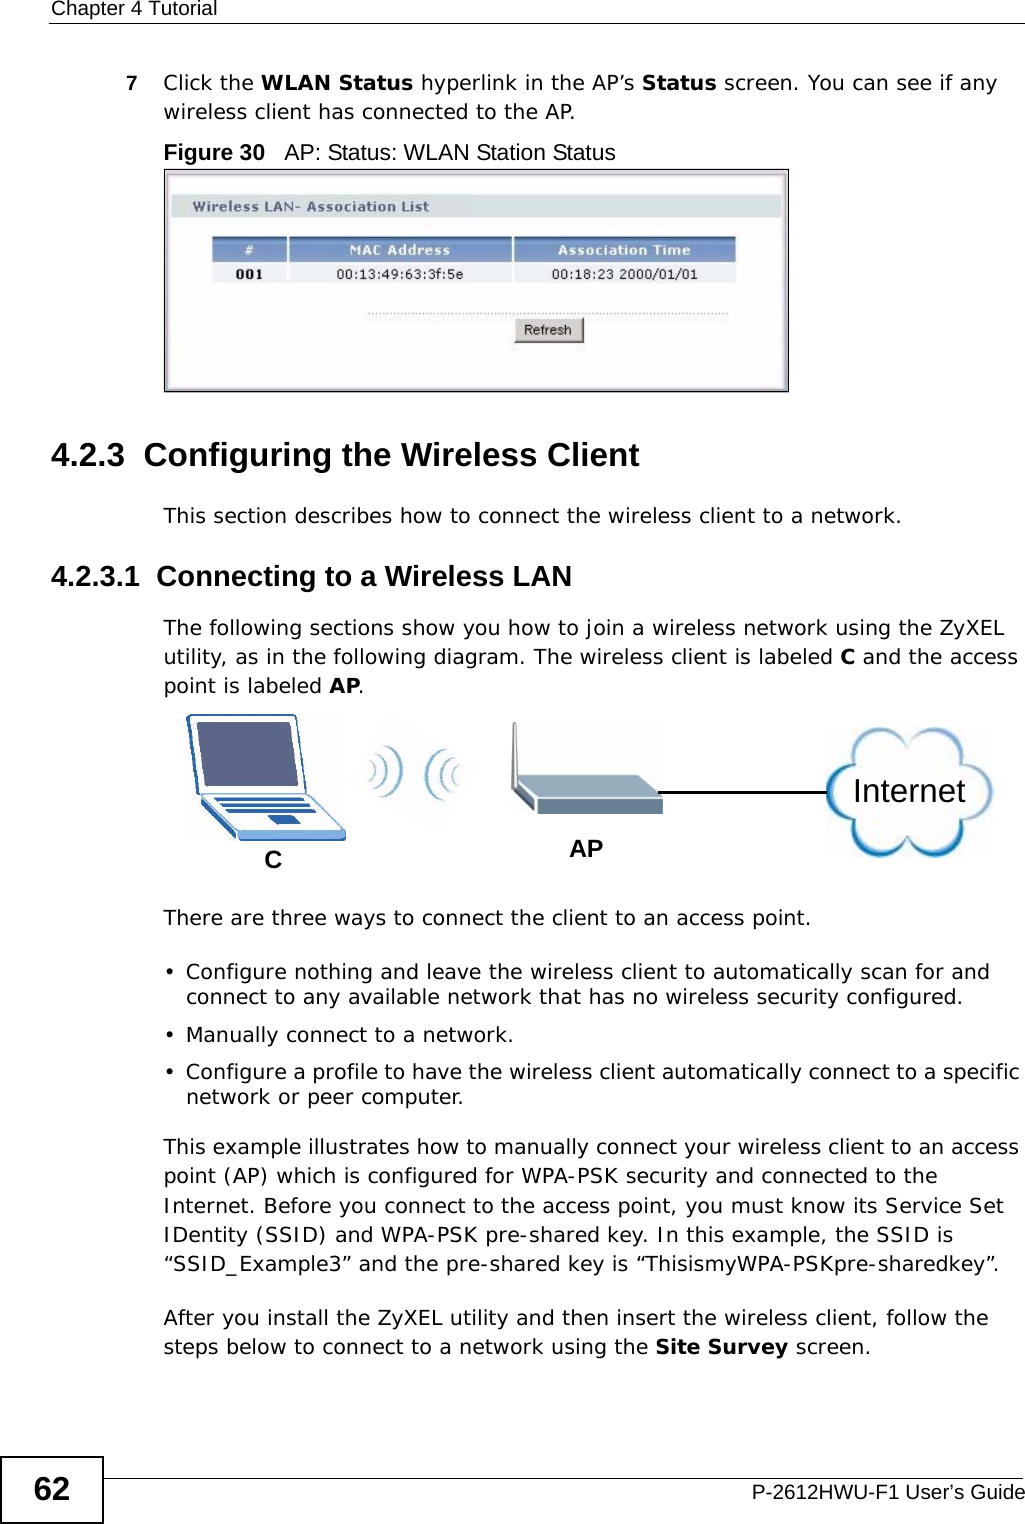 Chapter 4 TutorialP-2612HWU-F1 User’s Guide627Click the WLAN Status hyperlink in the AP’s Status screen. You can see if any wireless client has connected to the AP.Figure 30   AP: Status: WLAN Station Status4.2.3  Configuring the Wireless ClientThis section describes how to connect the wireless client to a network.4.2.3.1  Connecting to a Wireless LANThe following sections show you how to join a wireless network using the ZyXEL utility, as in the following diagram. The wireless client is labeled C and the access point is labeled AP.There are three ways to connect the client to an access point.• Configure nothing and leave the wireless client to automatically scan for and connect to any available network that has no wireless security configured.• Manually connect to a network.• Configure a profile to have the wireless client automatically connect to a specific network or peer computer. This example illustrates how to manually connect your wireless client to an access point (AP) which is configured for WPA-PSK security and connected to the Internet. Before you connect to the access point, you must know its Service Set IDentity (SSID) and WPA-PSK pre-shared key. In this example, the SSID is “SSID_Example3” and the pre-shared key is “ThisismyWPA-PSKpre-sharedkey”. After you install the ZyXEL utility and then insert the wireless client, follow the steps below to connect to a network using the Site Survey screen. CAPInternet